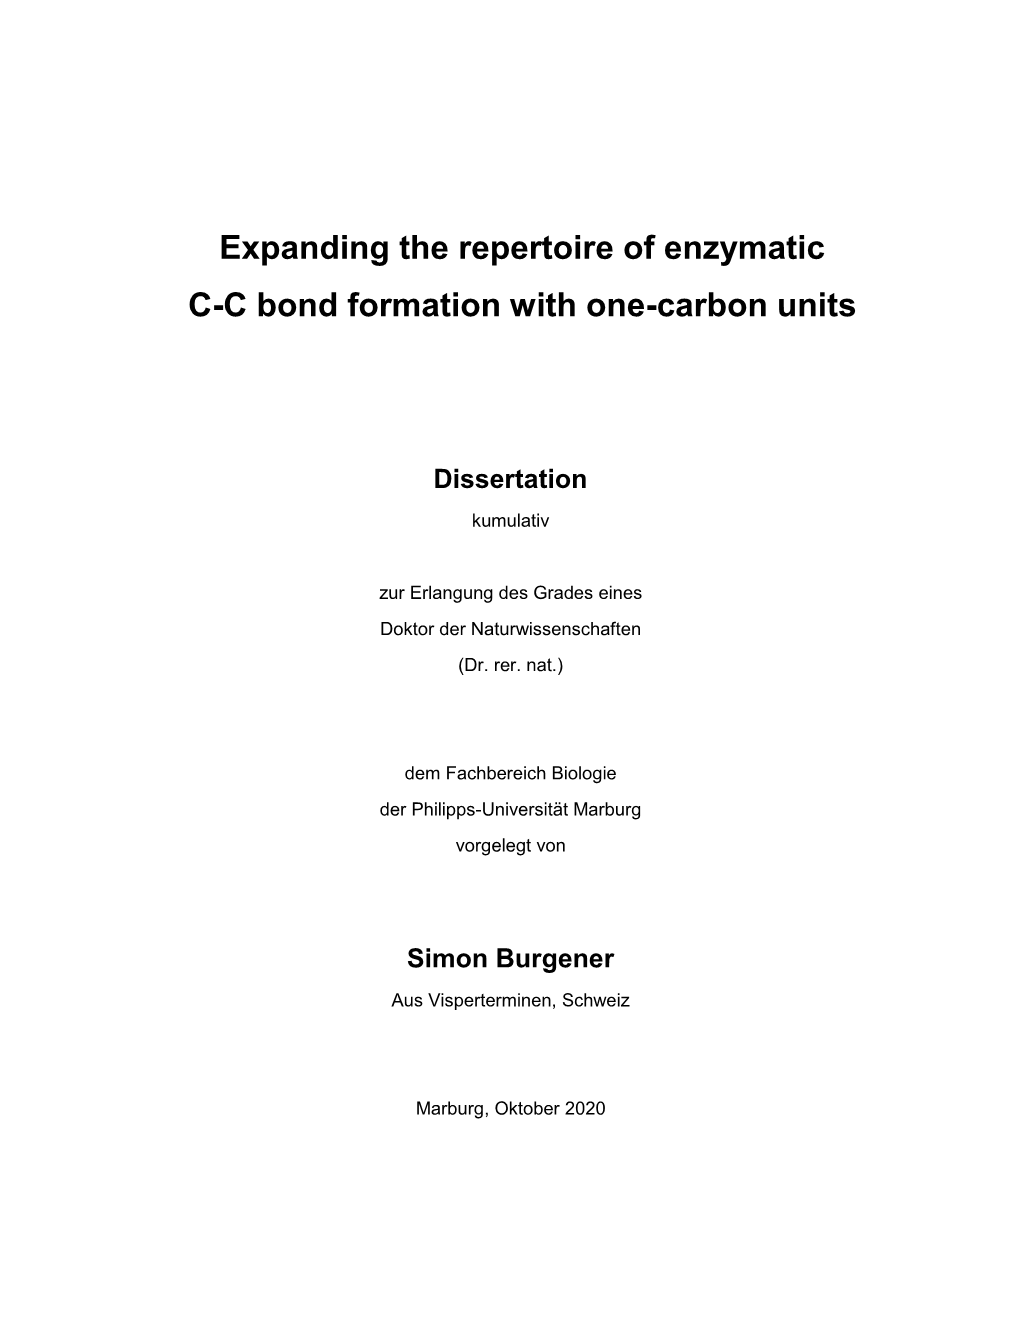 Expanding the Repertoire of Enzymatic C-C Bond Formation with One-Carbon Units